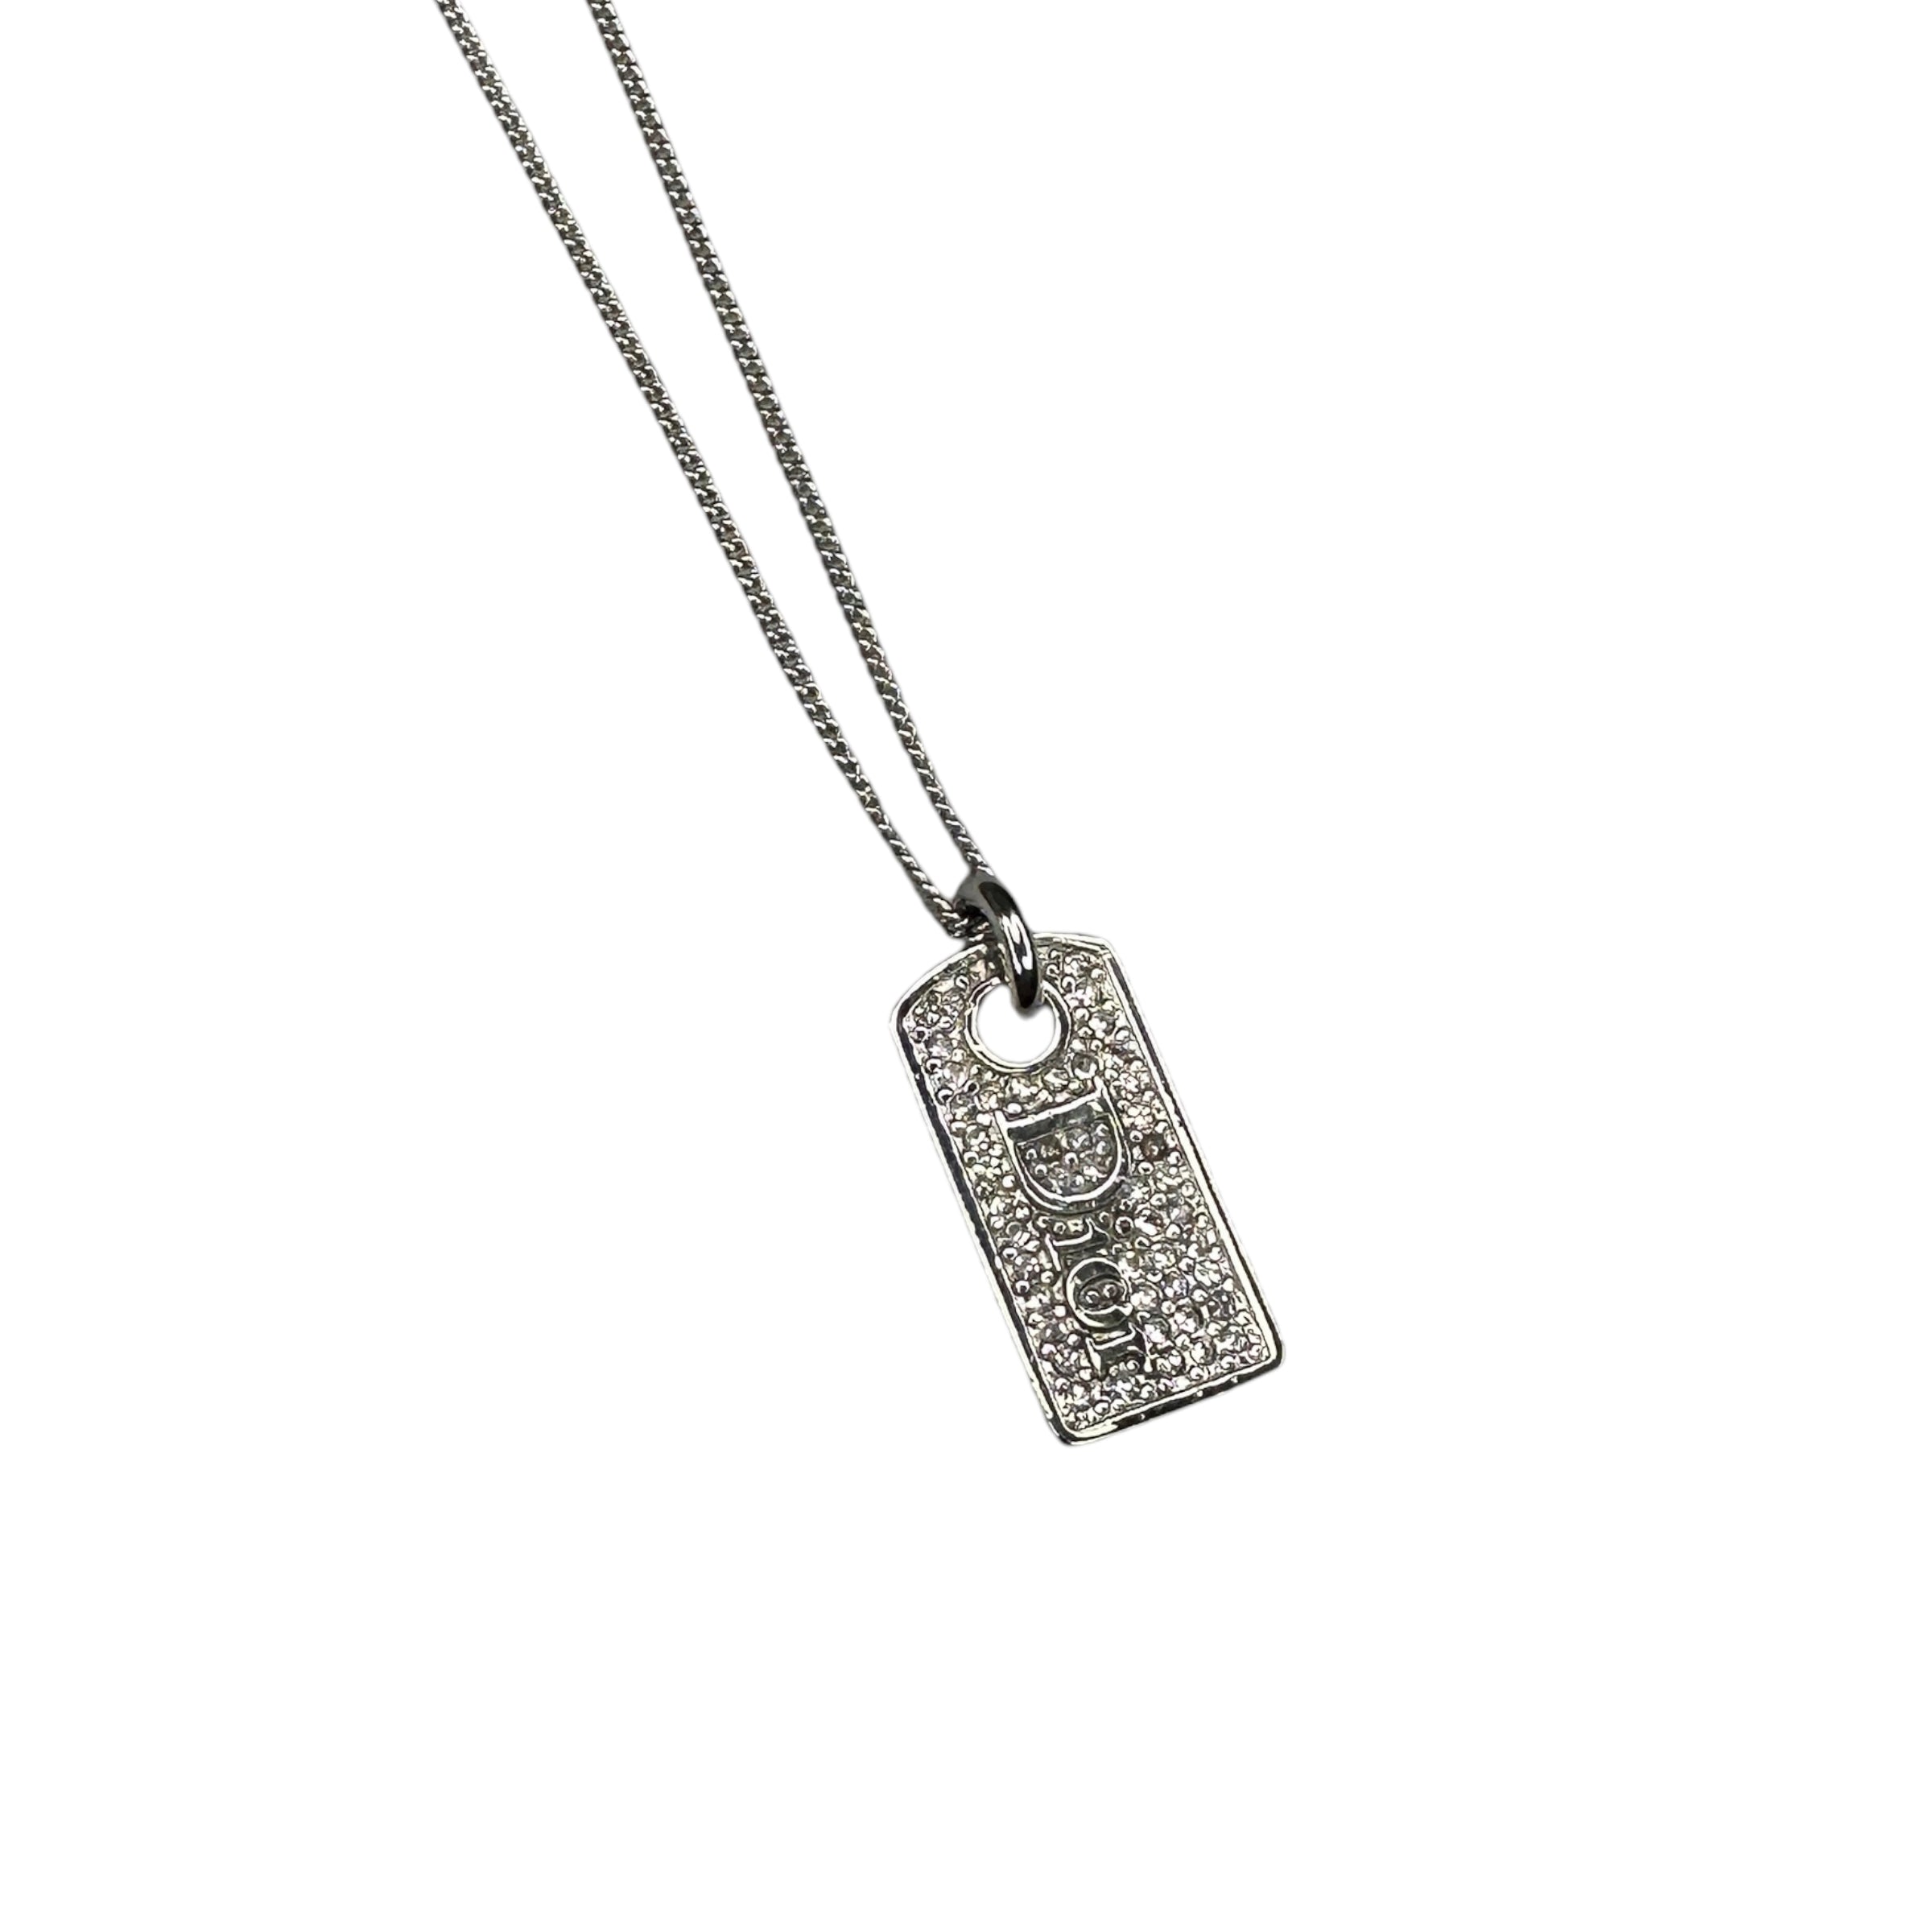 DIOR RHINESTONE SPELLOUT TAG NECKLACE - SILVER PLATED JE82